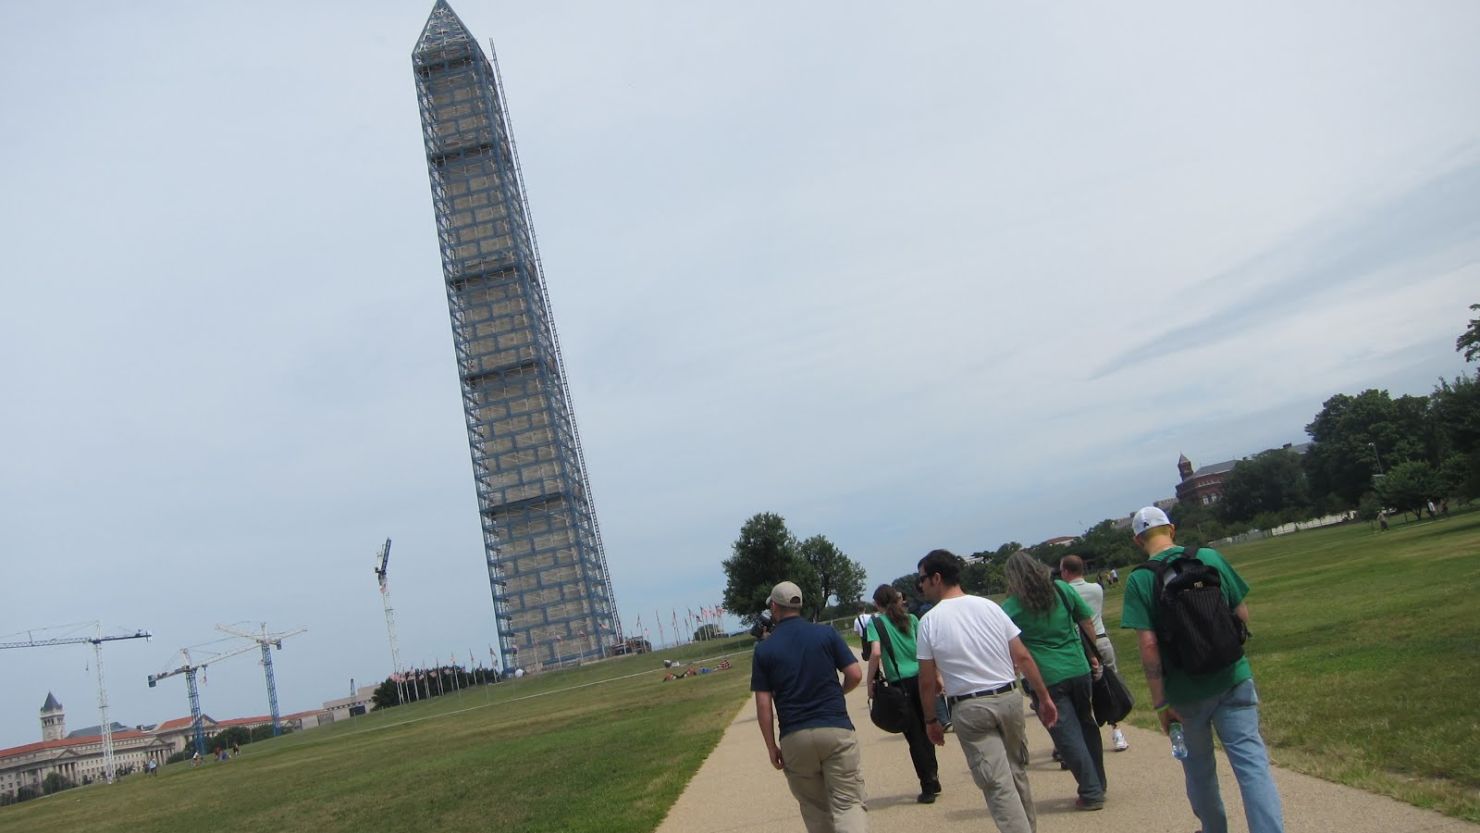 In Ingress, real-life landmarks, like the Washington Monument, serve as in-game "portals" players must capture.